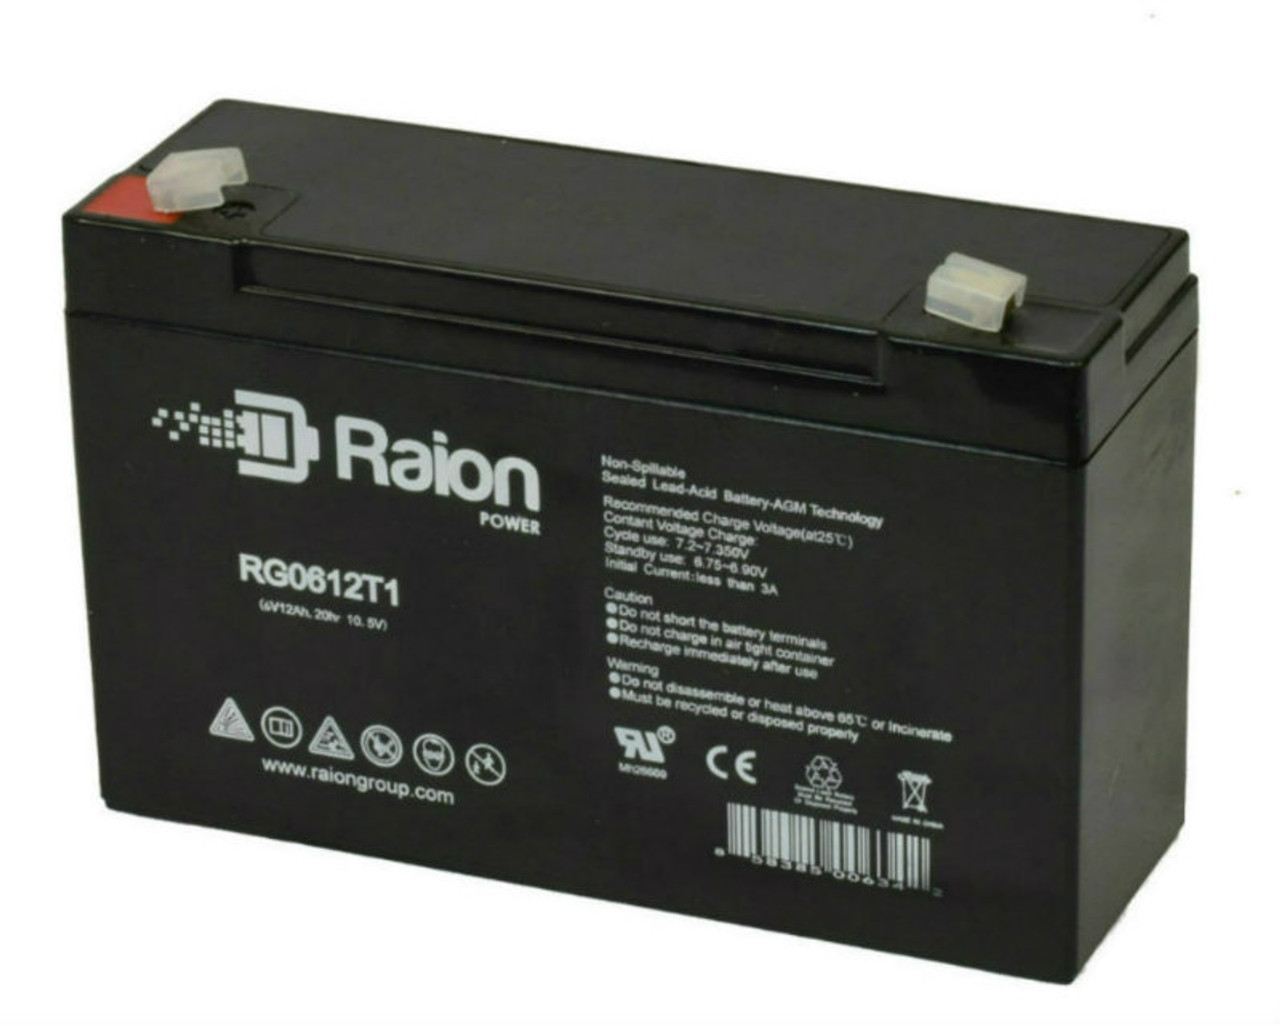 Raion Power RG06120T1 Replacement Emergency Light Battery for Siltron WB-6-8